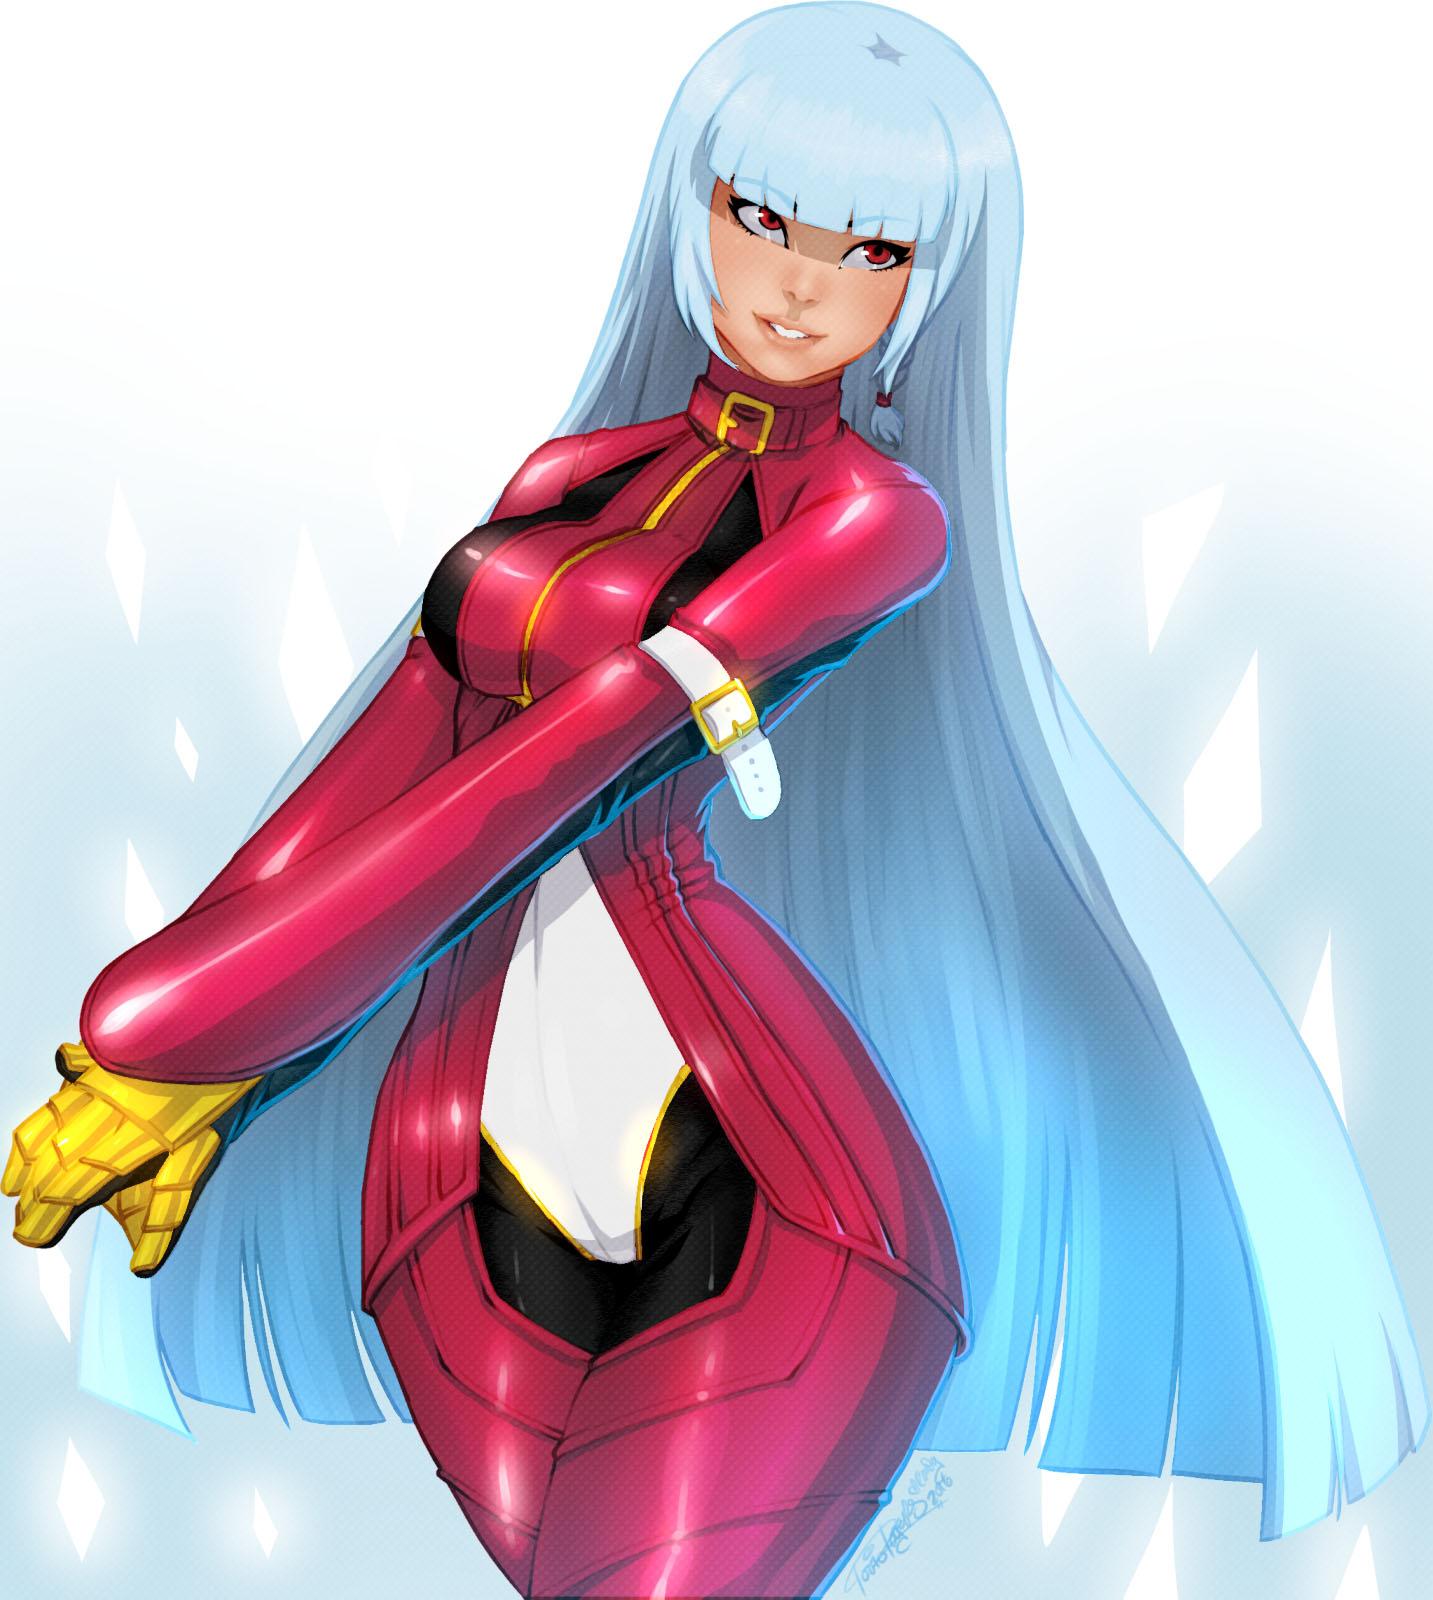 Kula Diamond from The King of Fighters Art